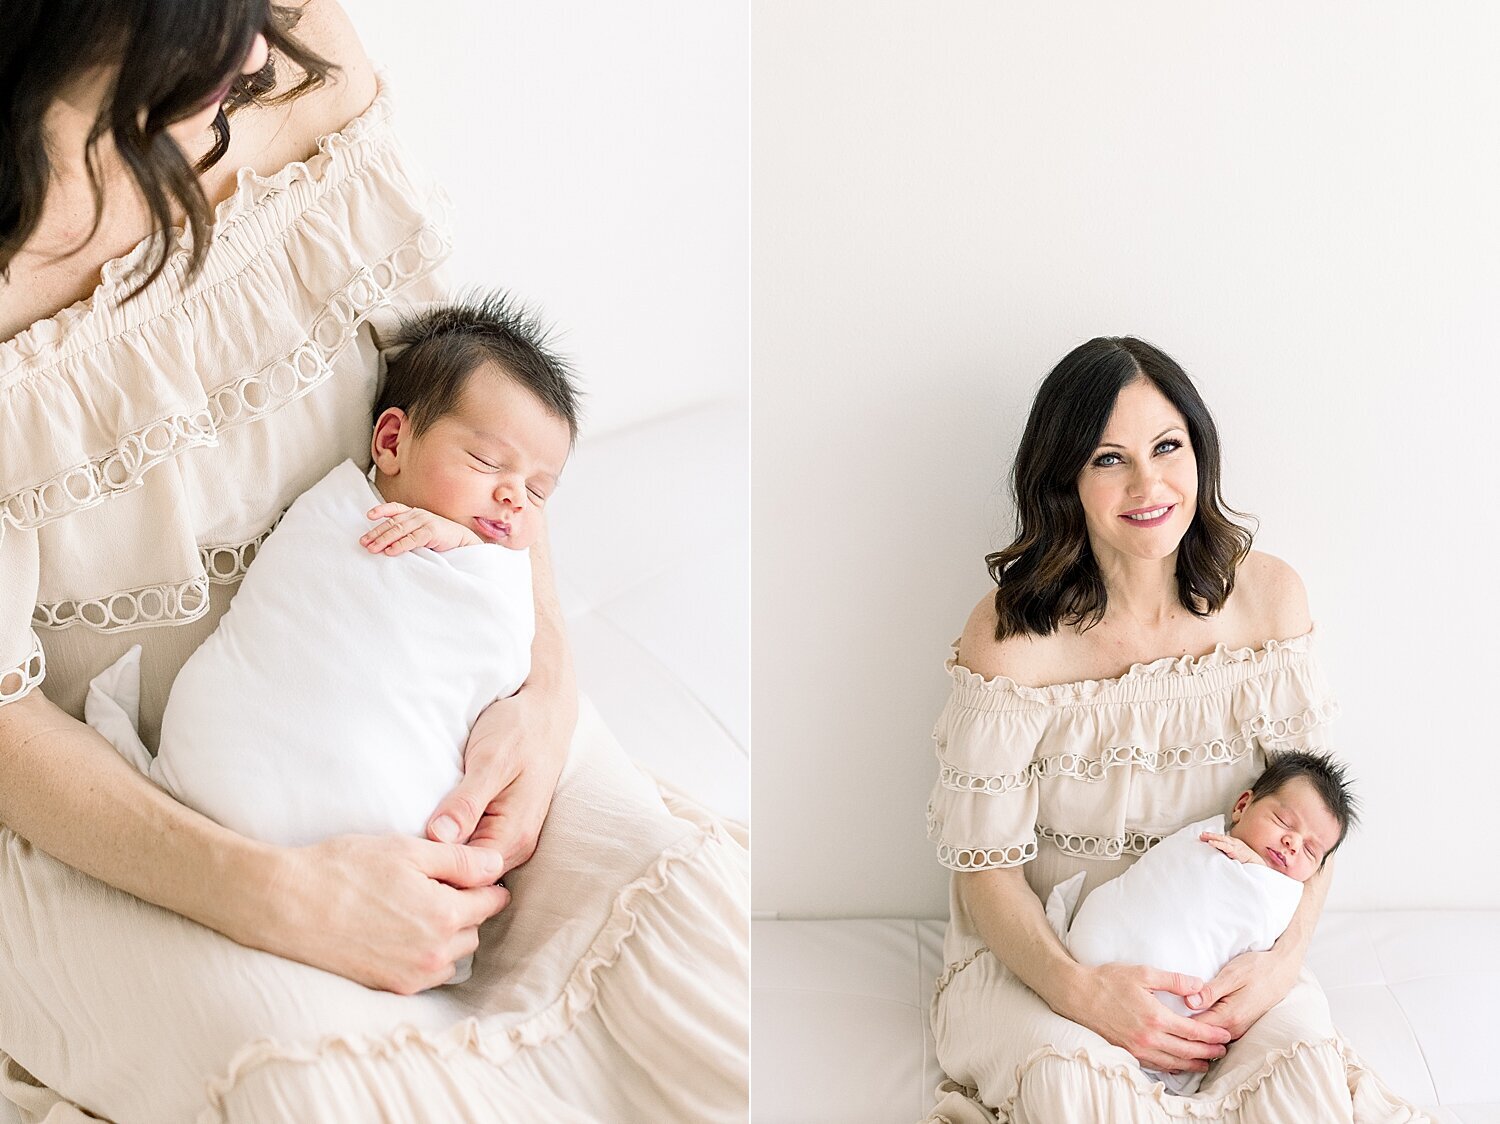 Mom and baby during newborn session. Photo by Ambre Williams Photography.